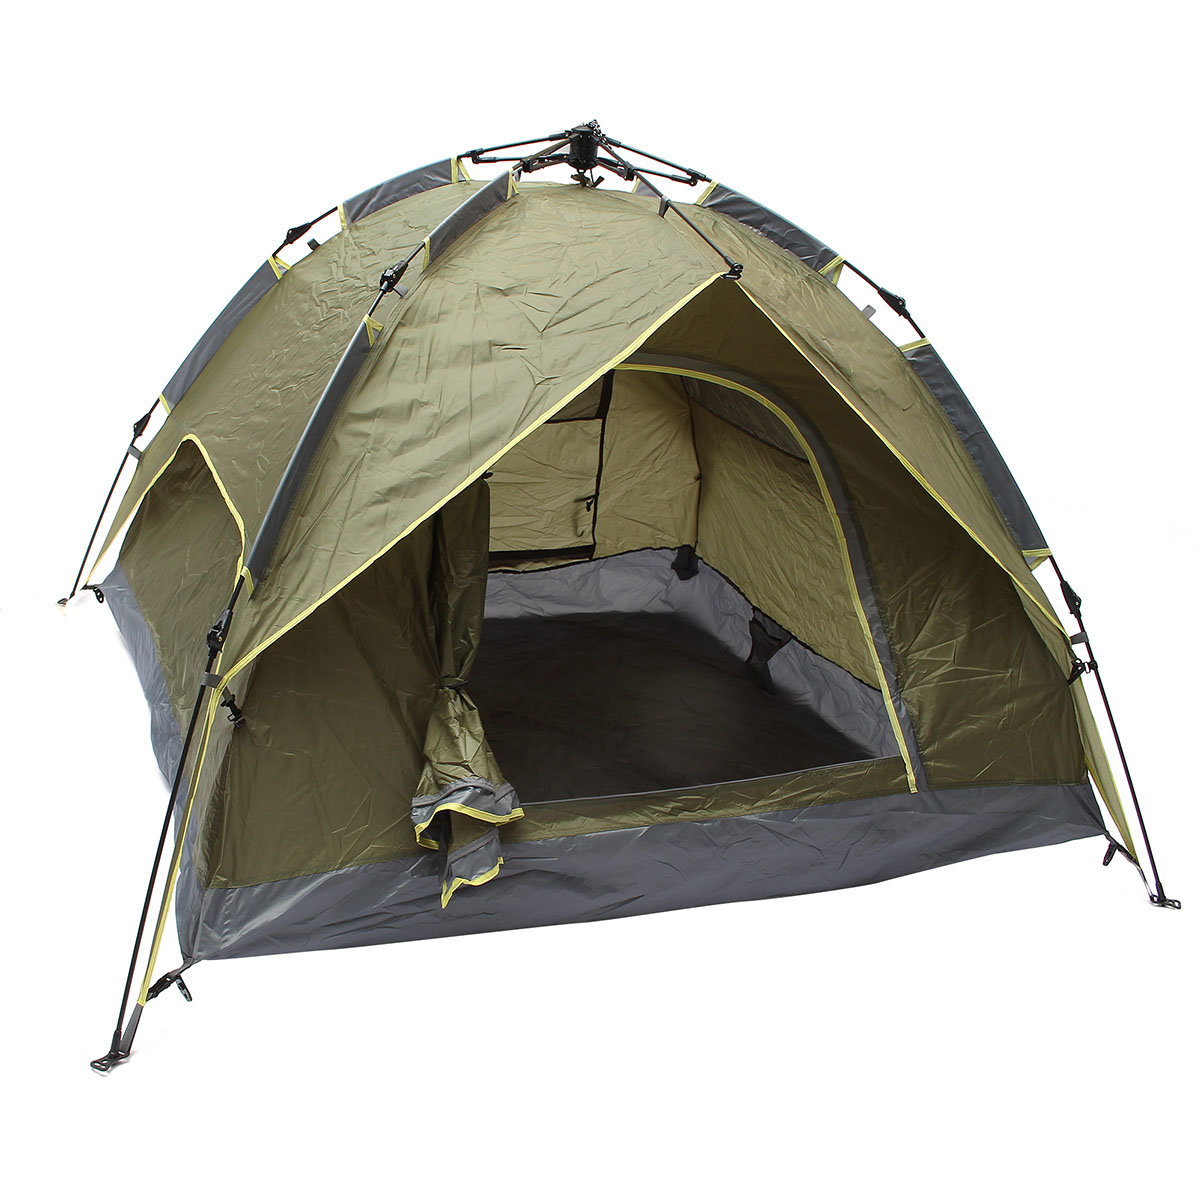 Outdoor 3-4 Persons Camping Tent Automatic Double Layer Waterproof Windproof UV Sunshade Canopy